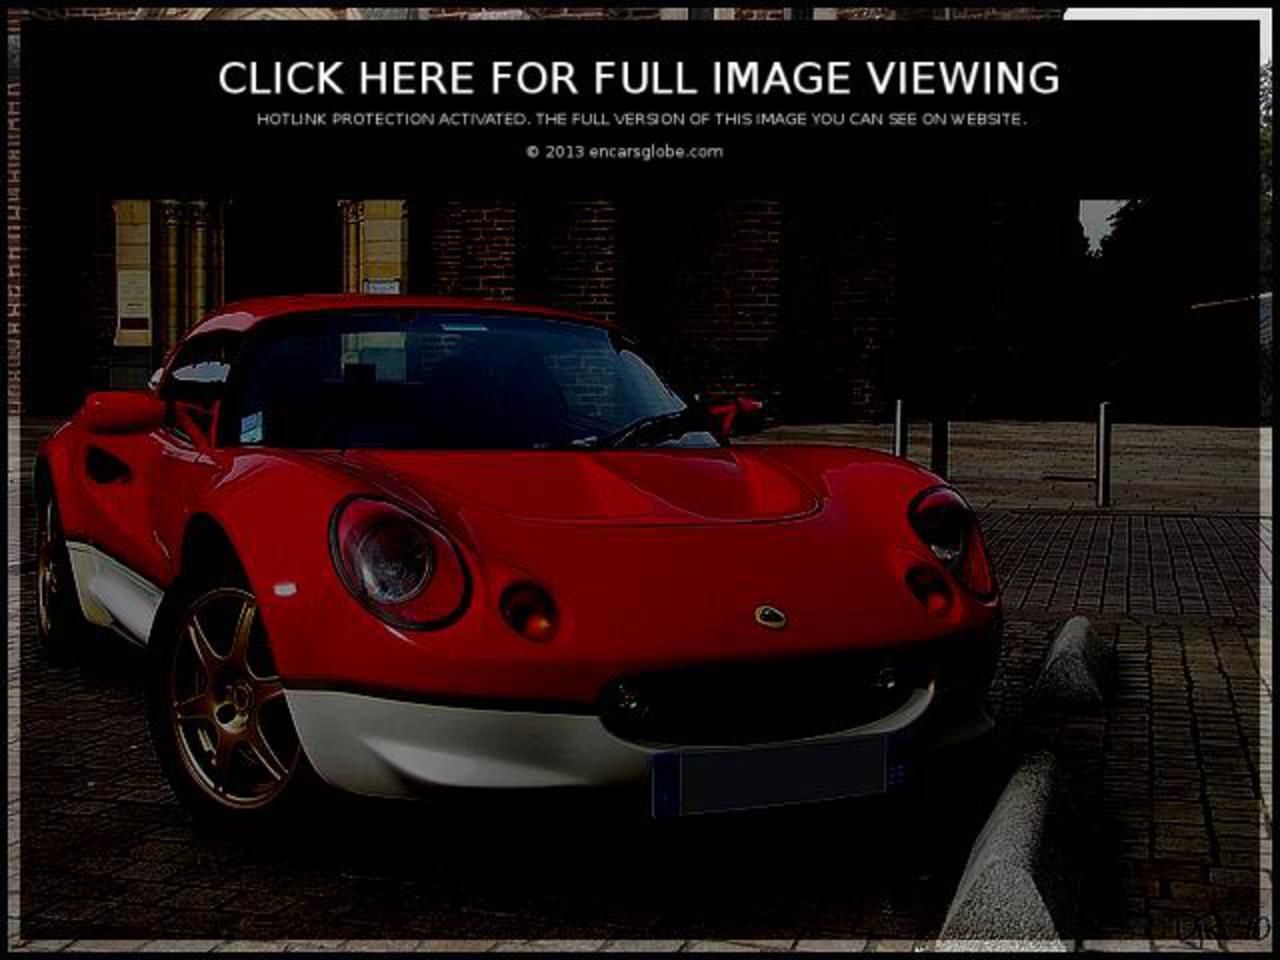 Lotus Elise 111S type 49: Photo gallery, complete information ...